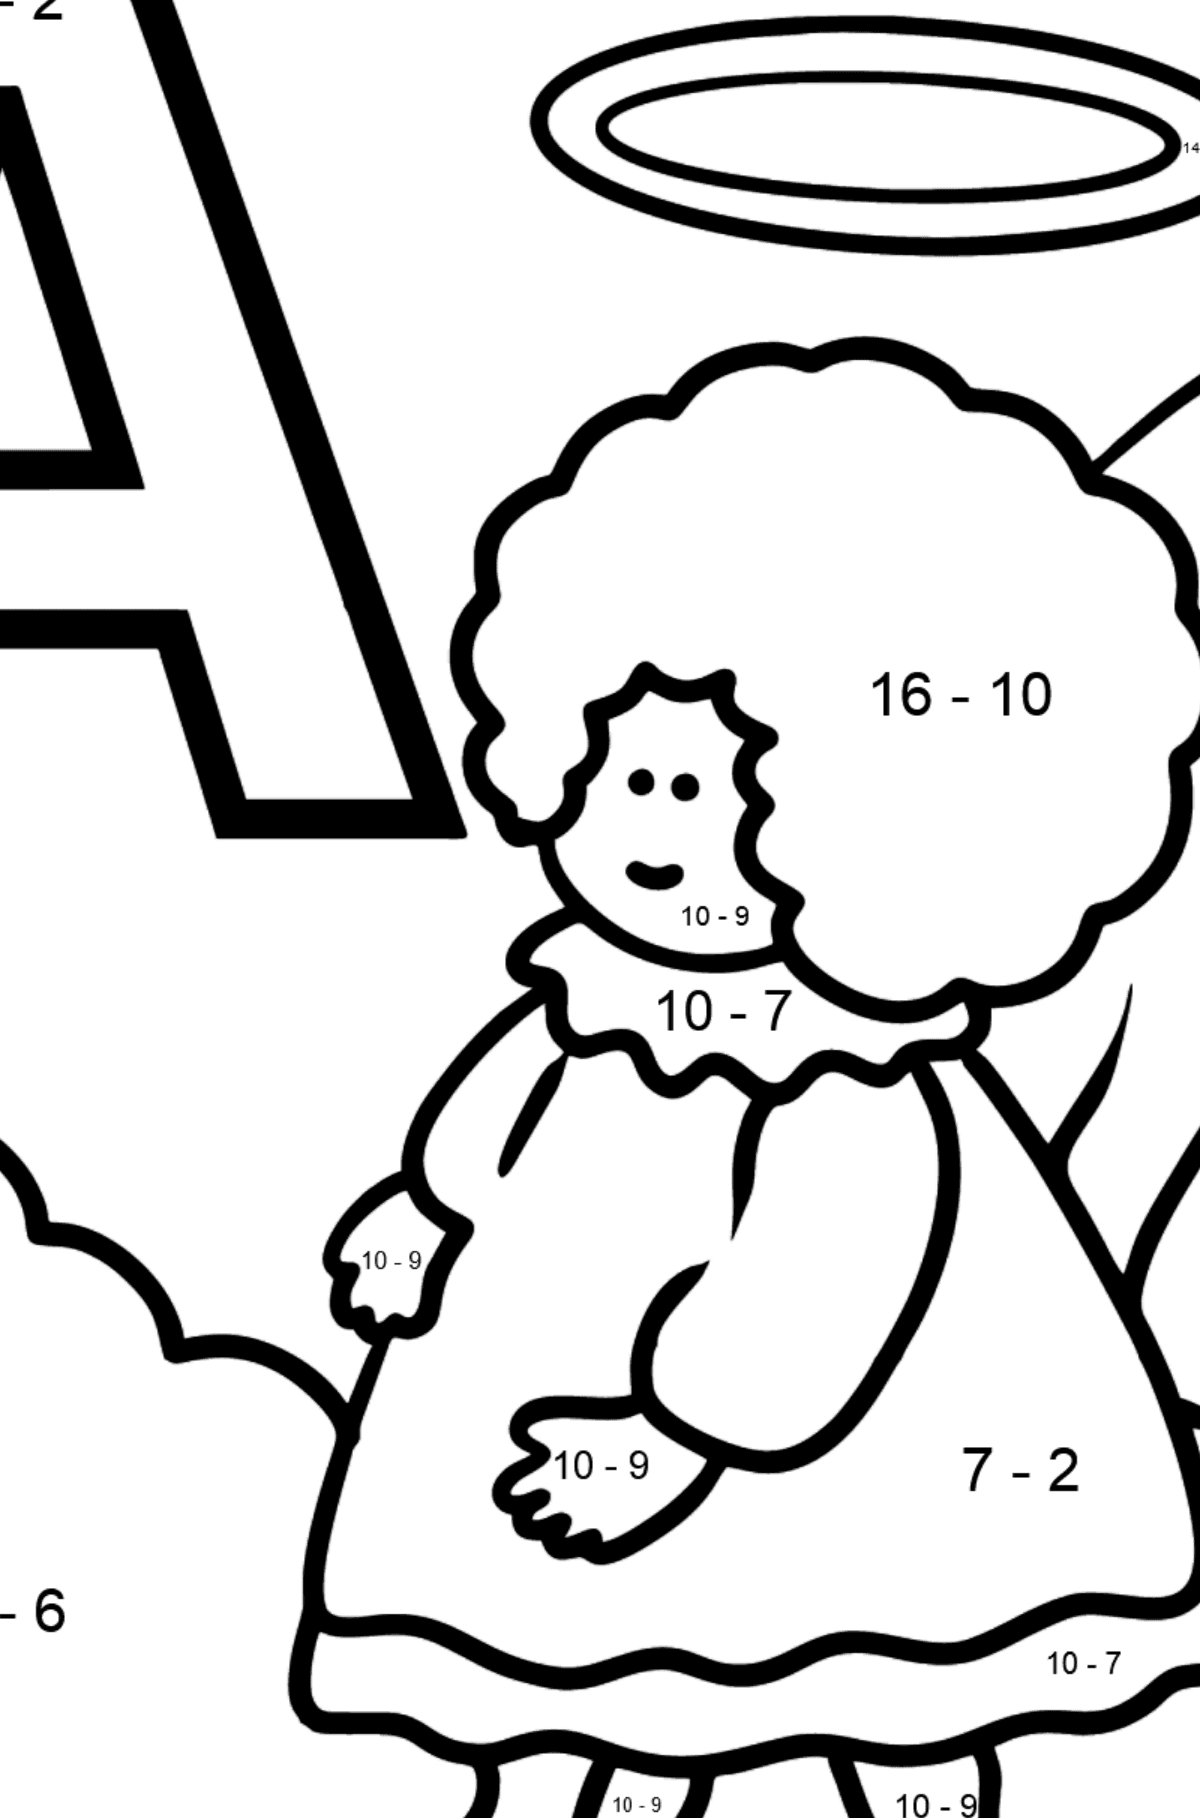 Spanish Letter A coloring pages - ÁNGEL - Math Coloring - Subtraction for Kids